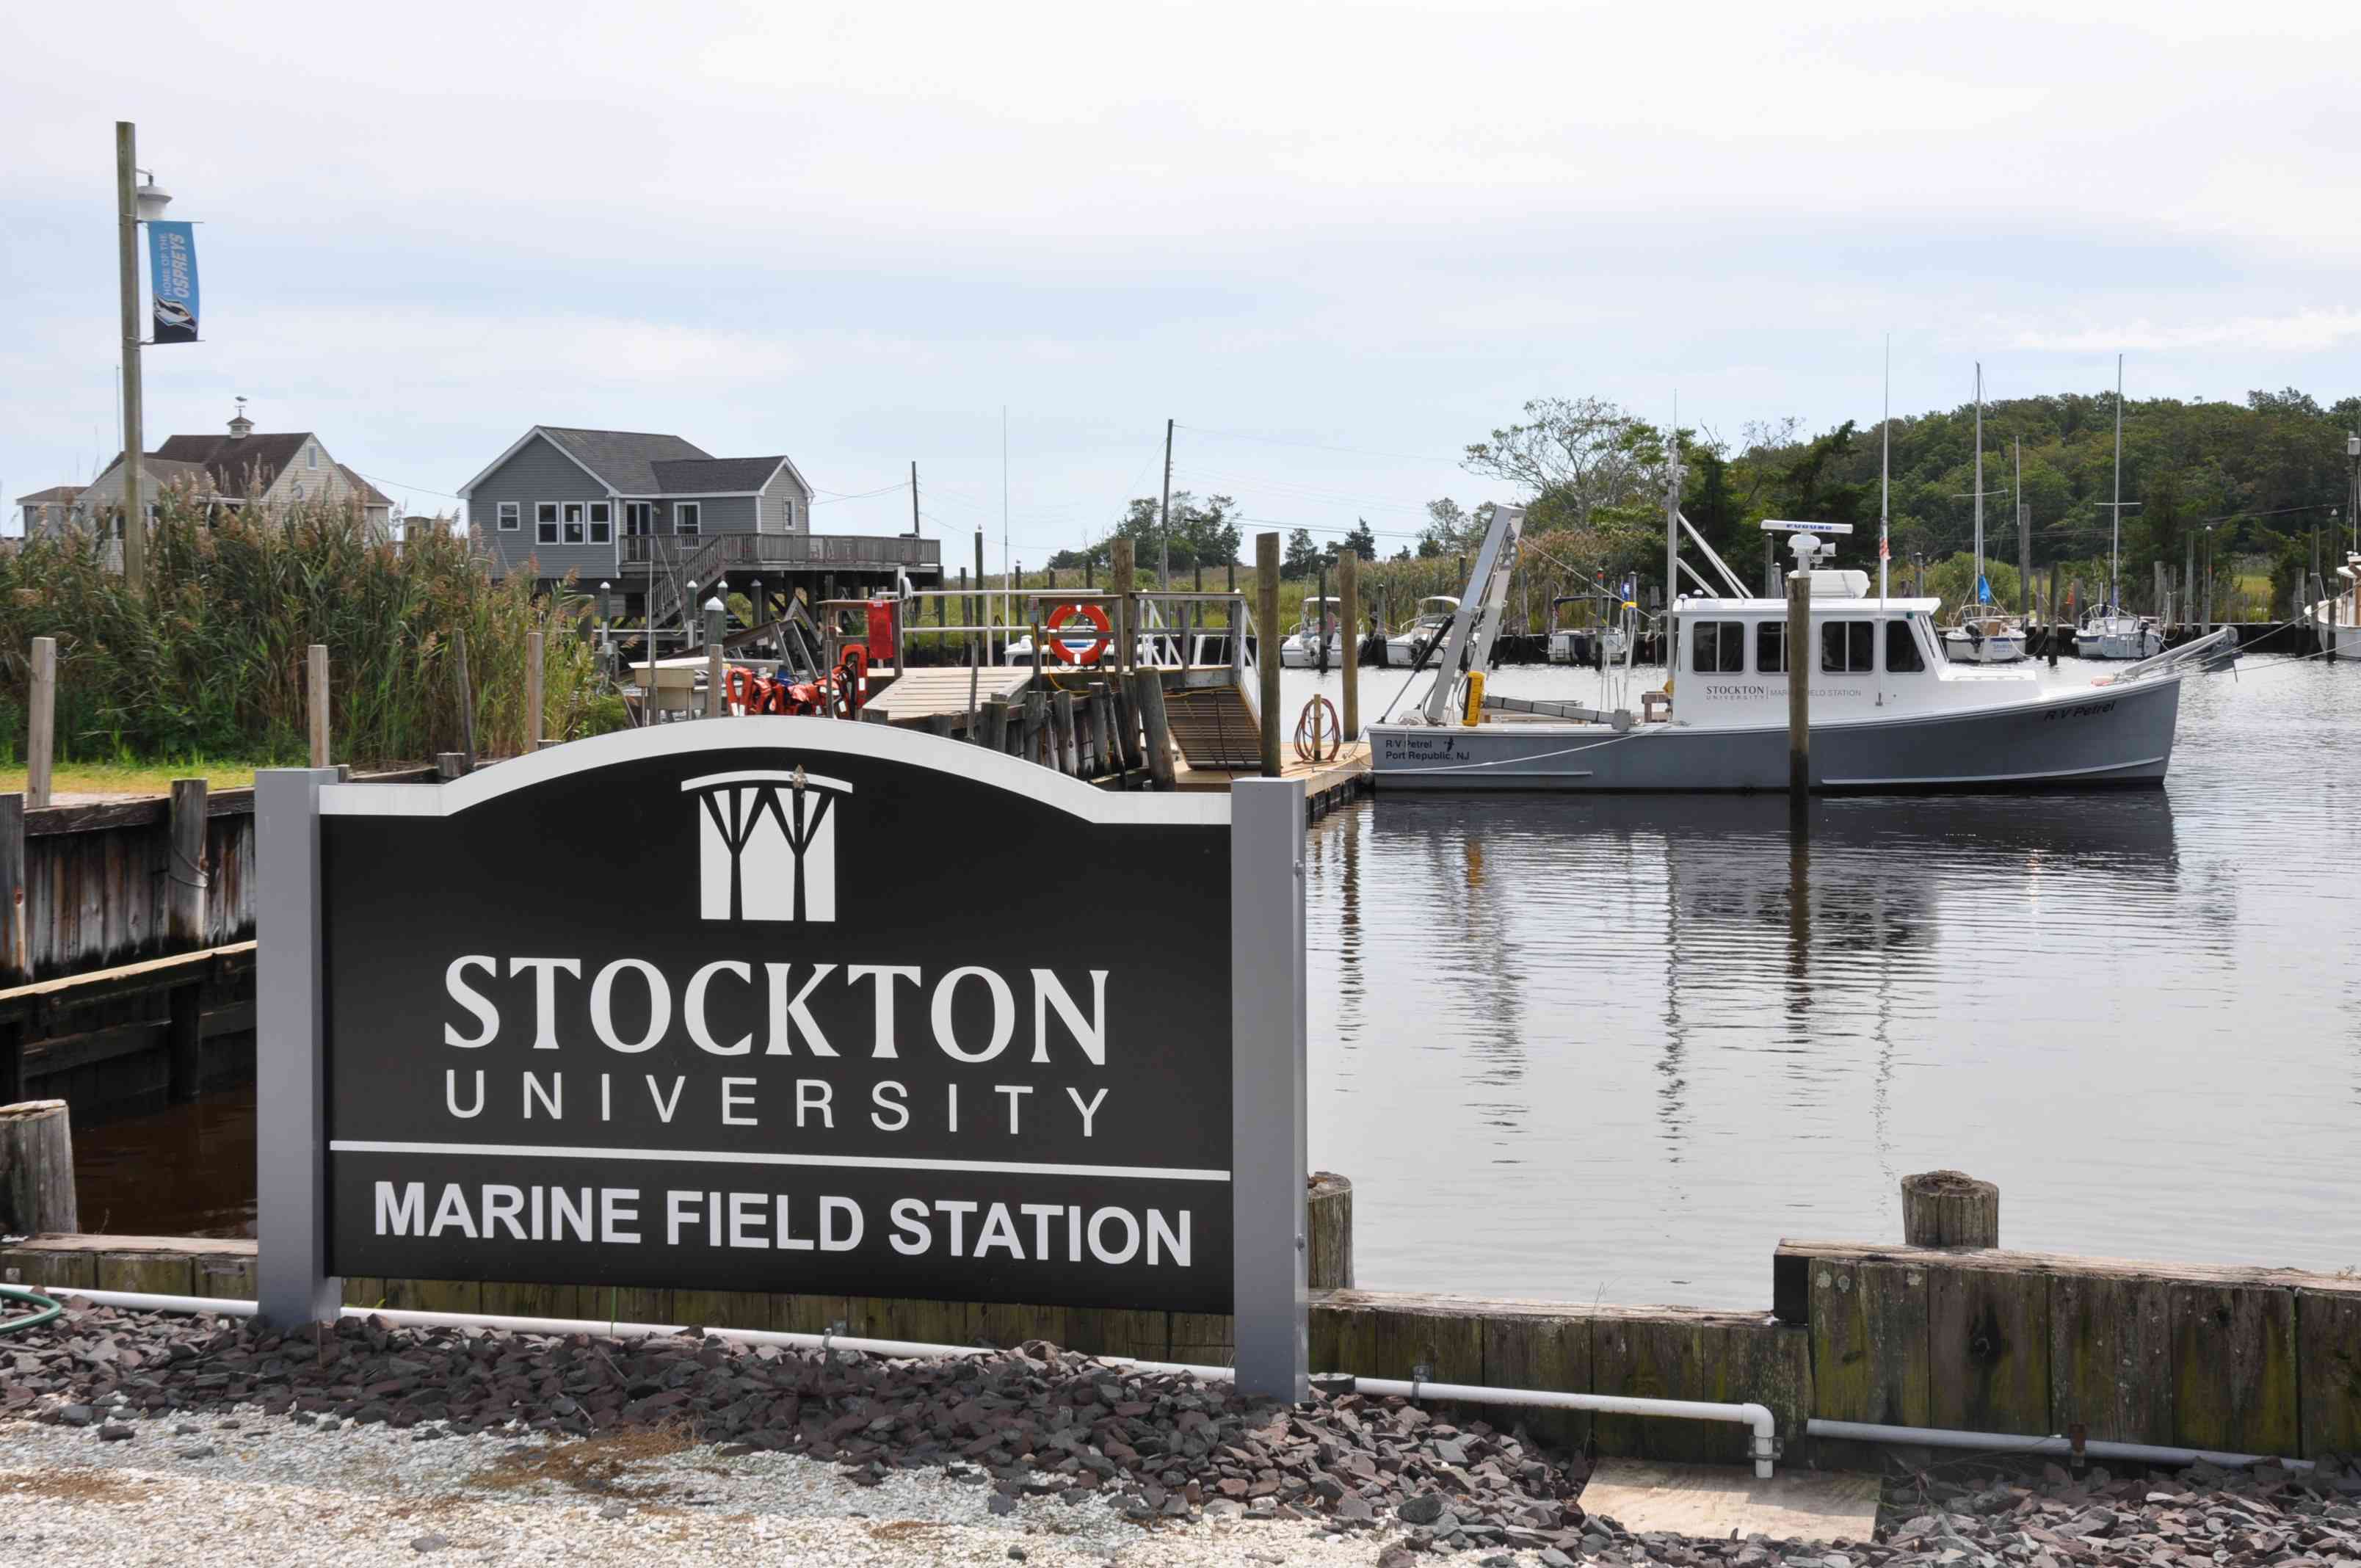 Picture of the Stockton Marine Field Station sign